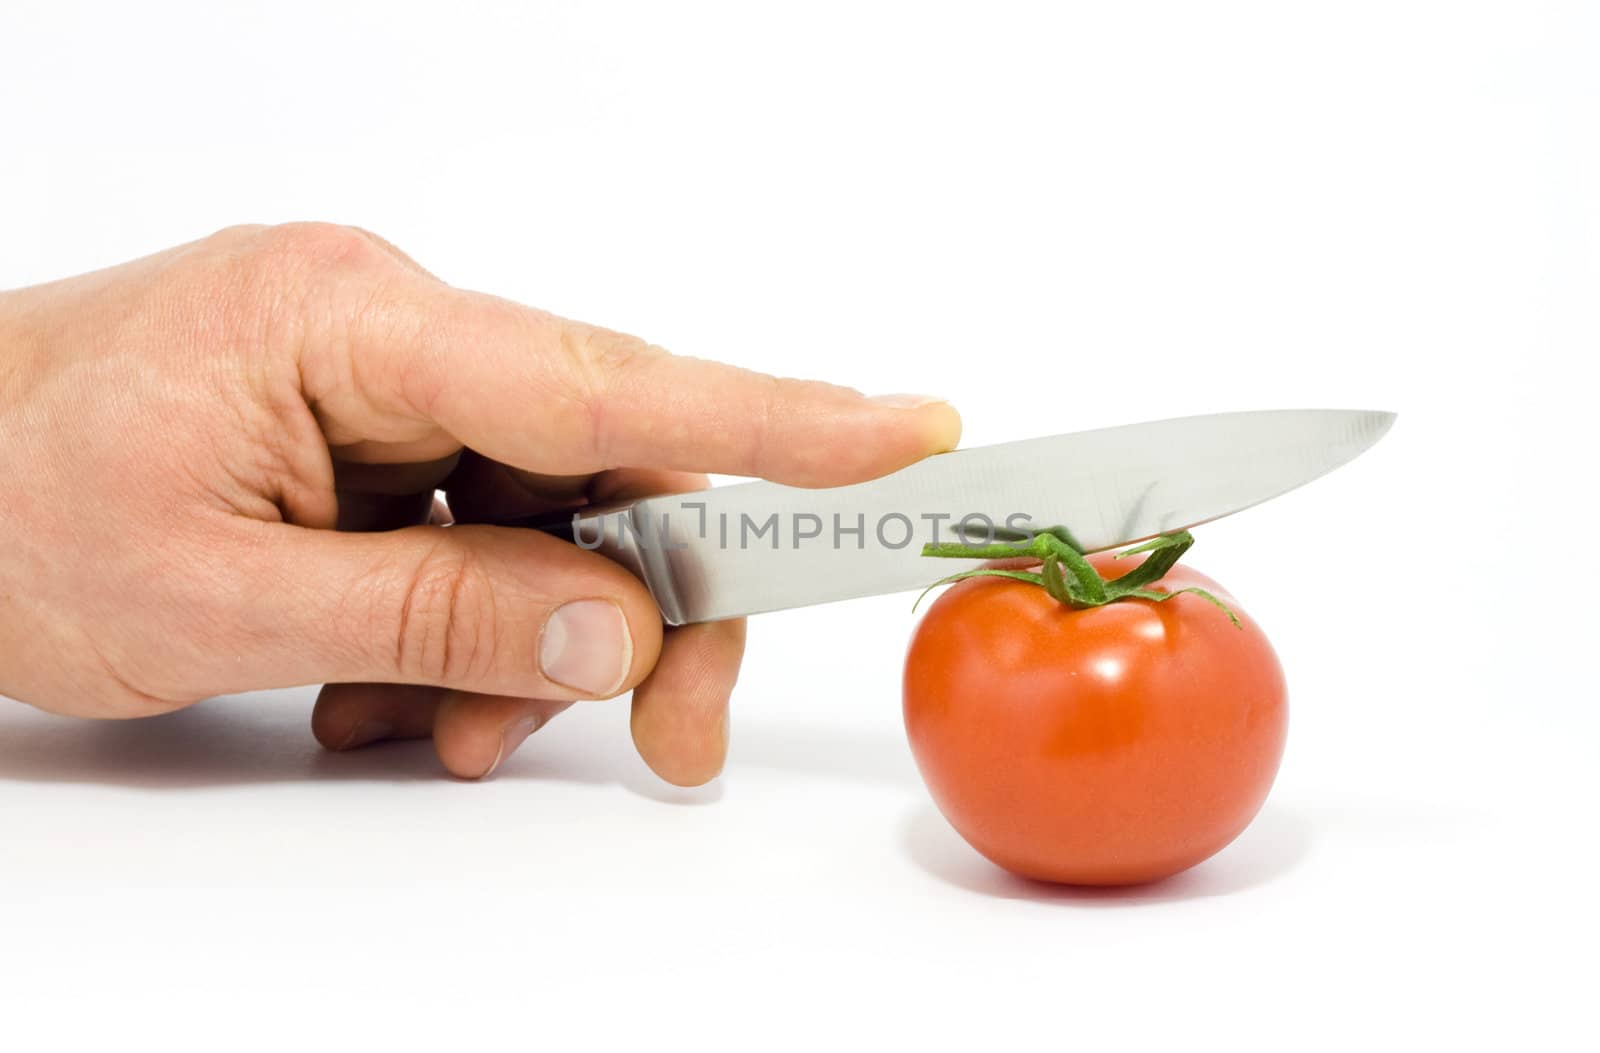 A hand with knife and tomato by ursolv